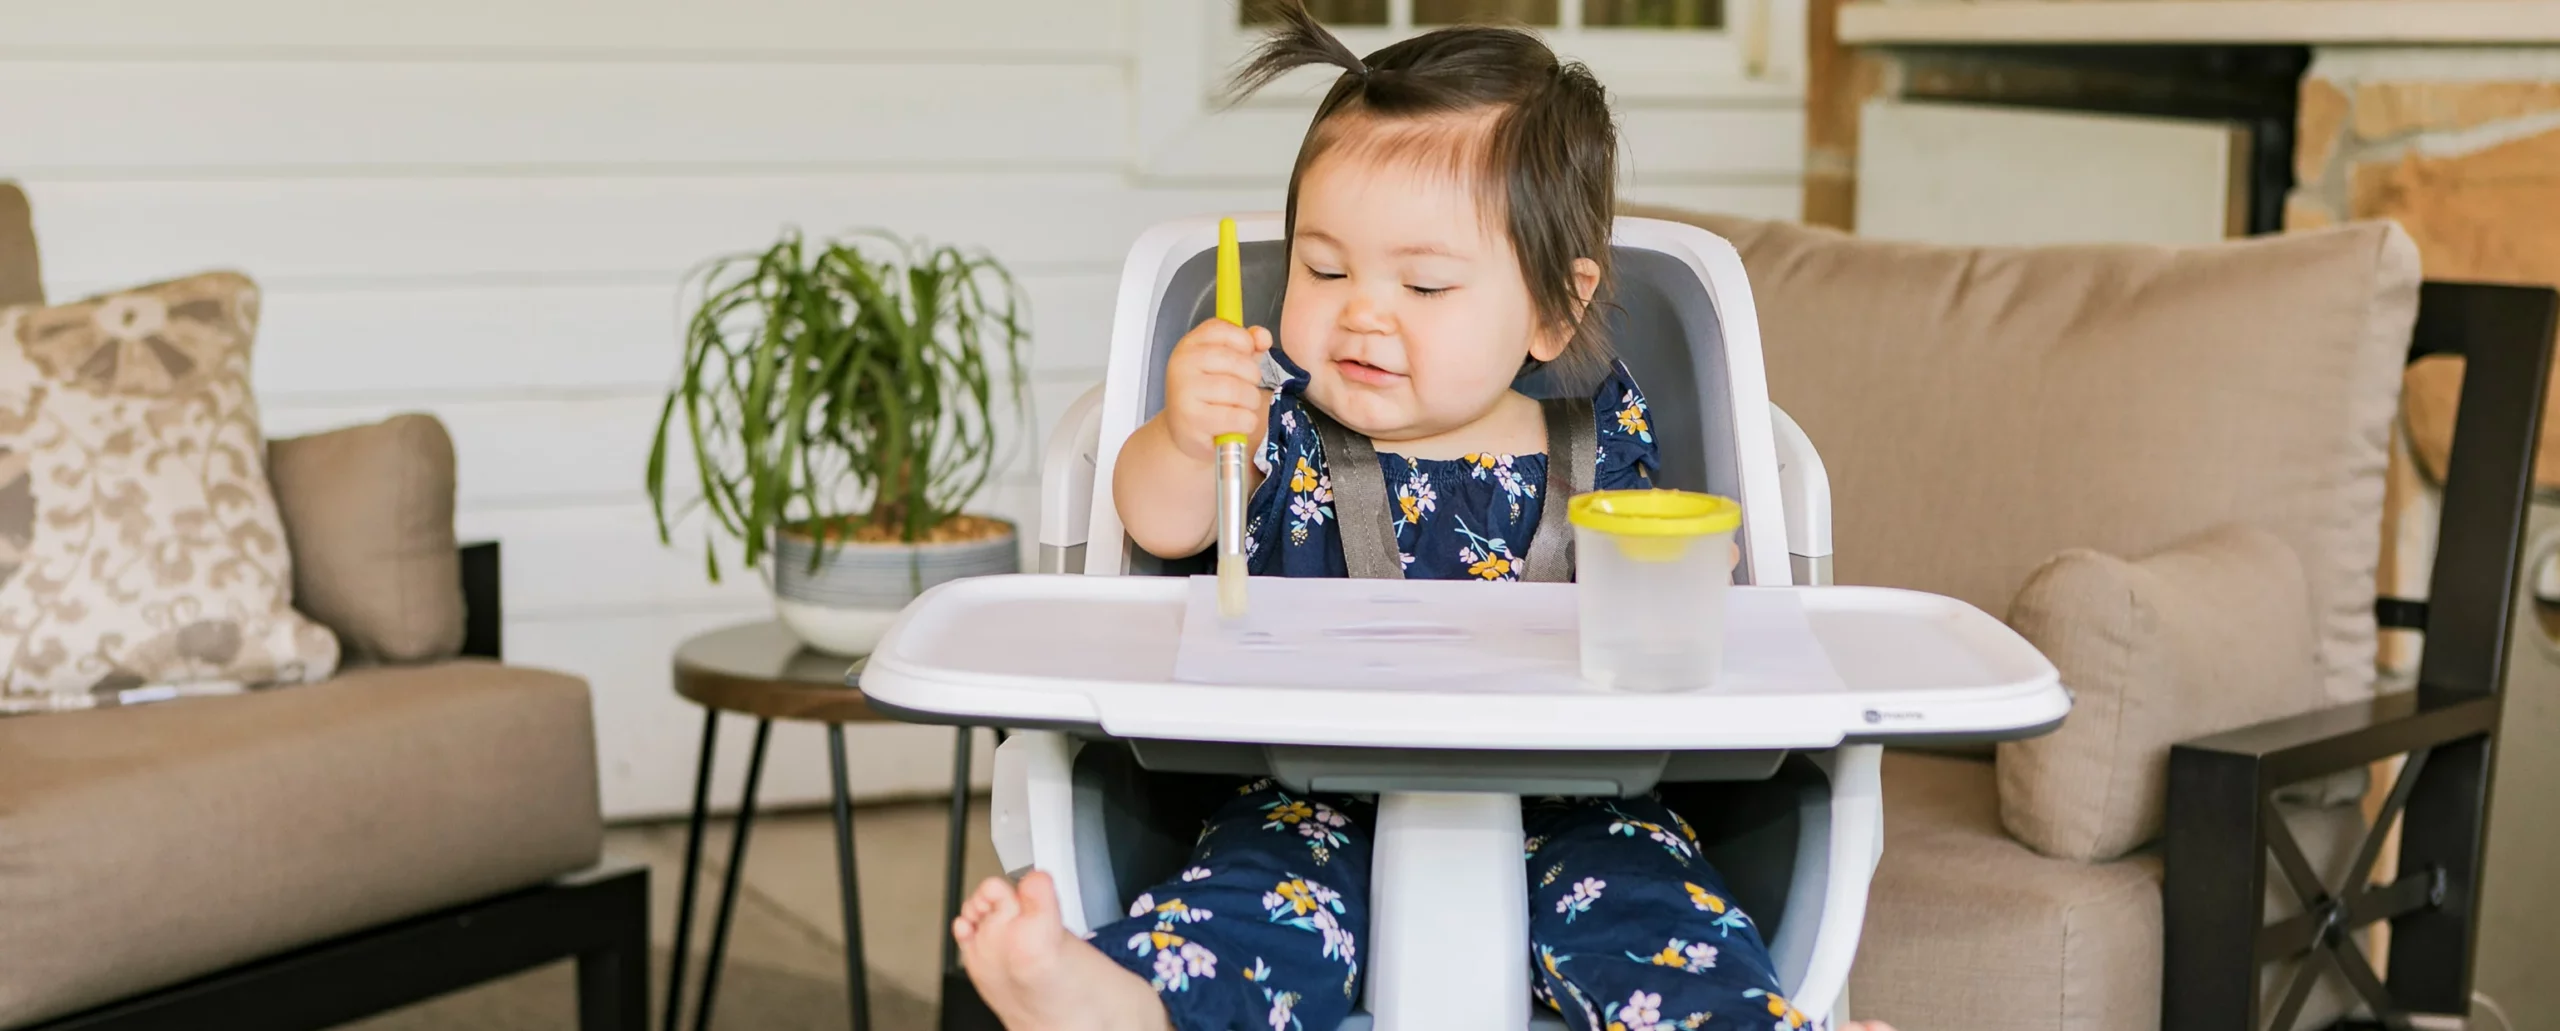 5 High Chair Activities to Keep Your Toddler Entertained